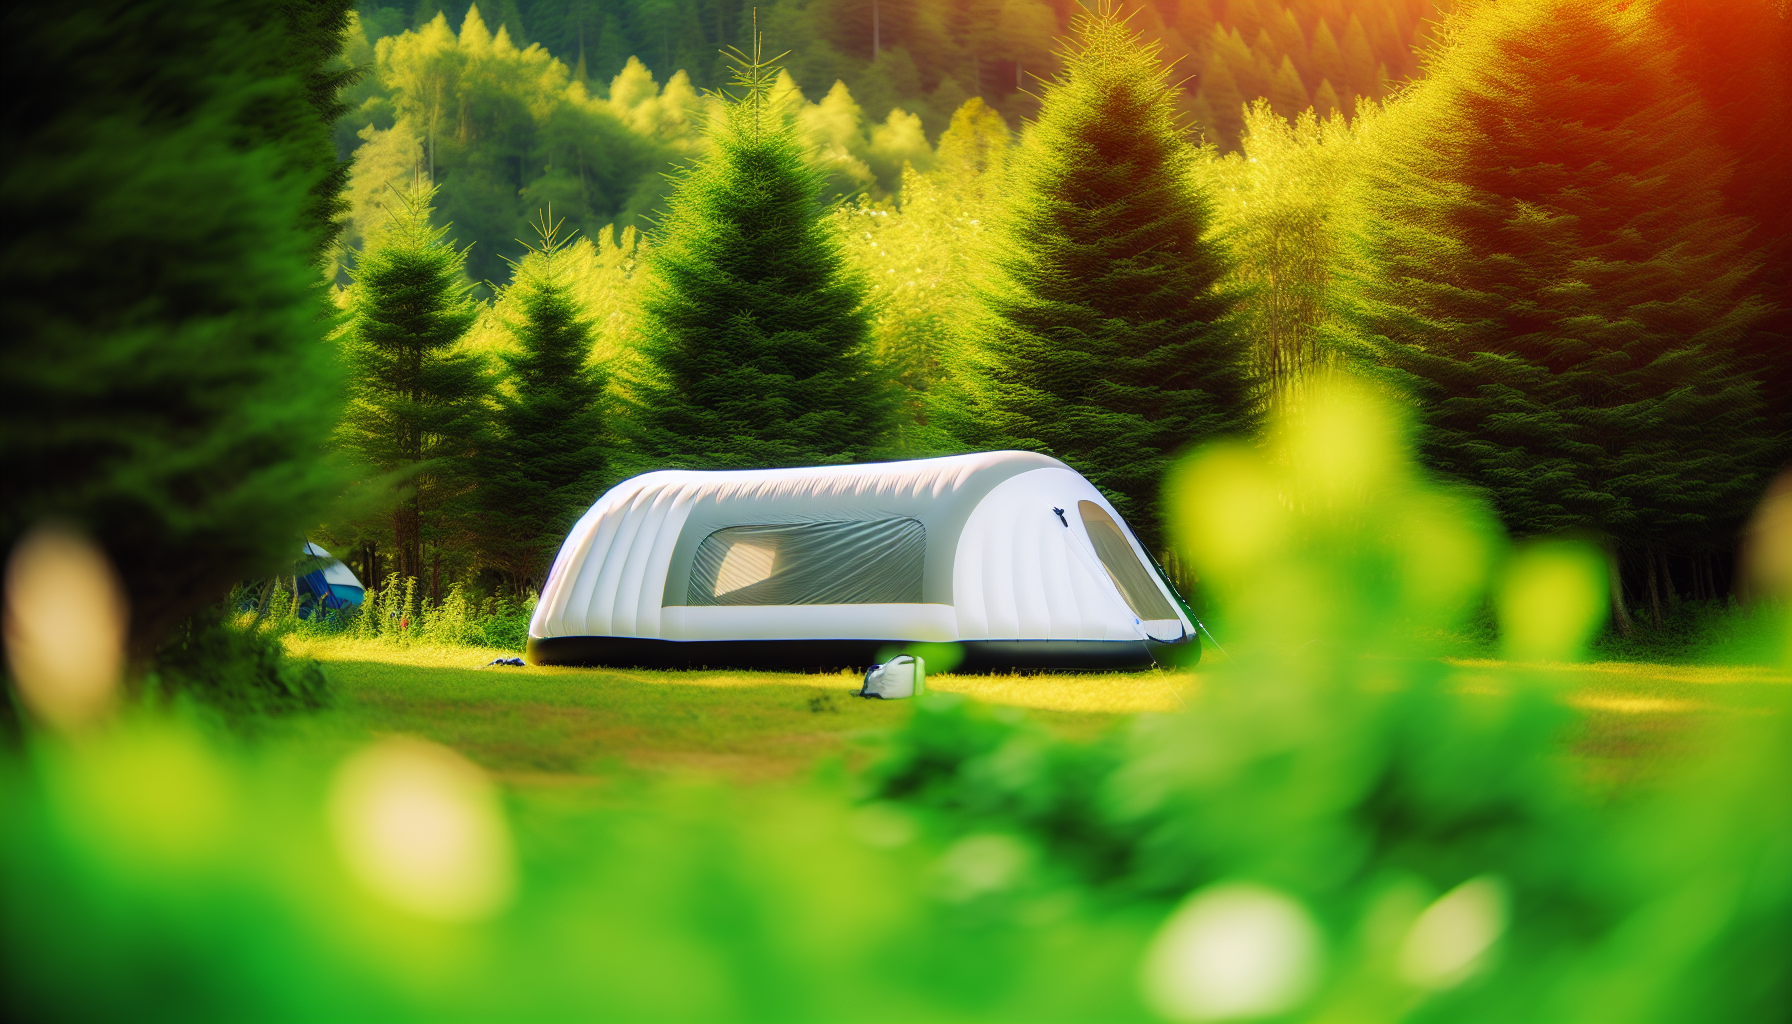 Inflatable tent pitched in a scenic camping location